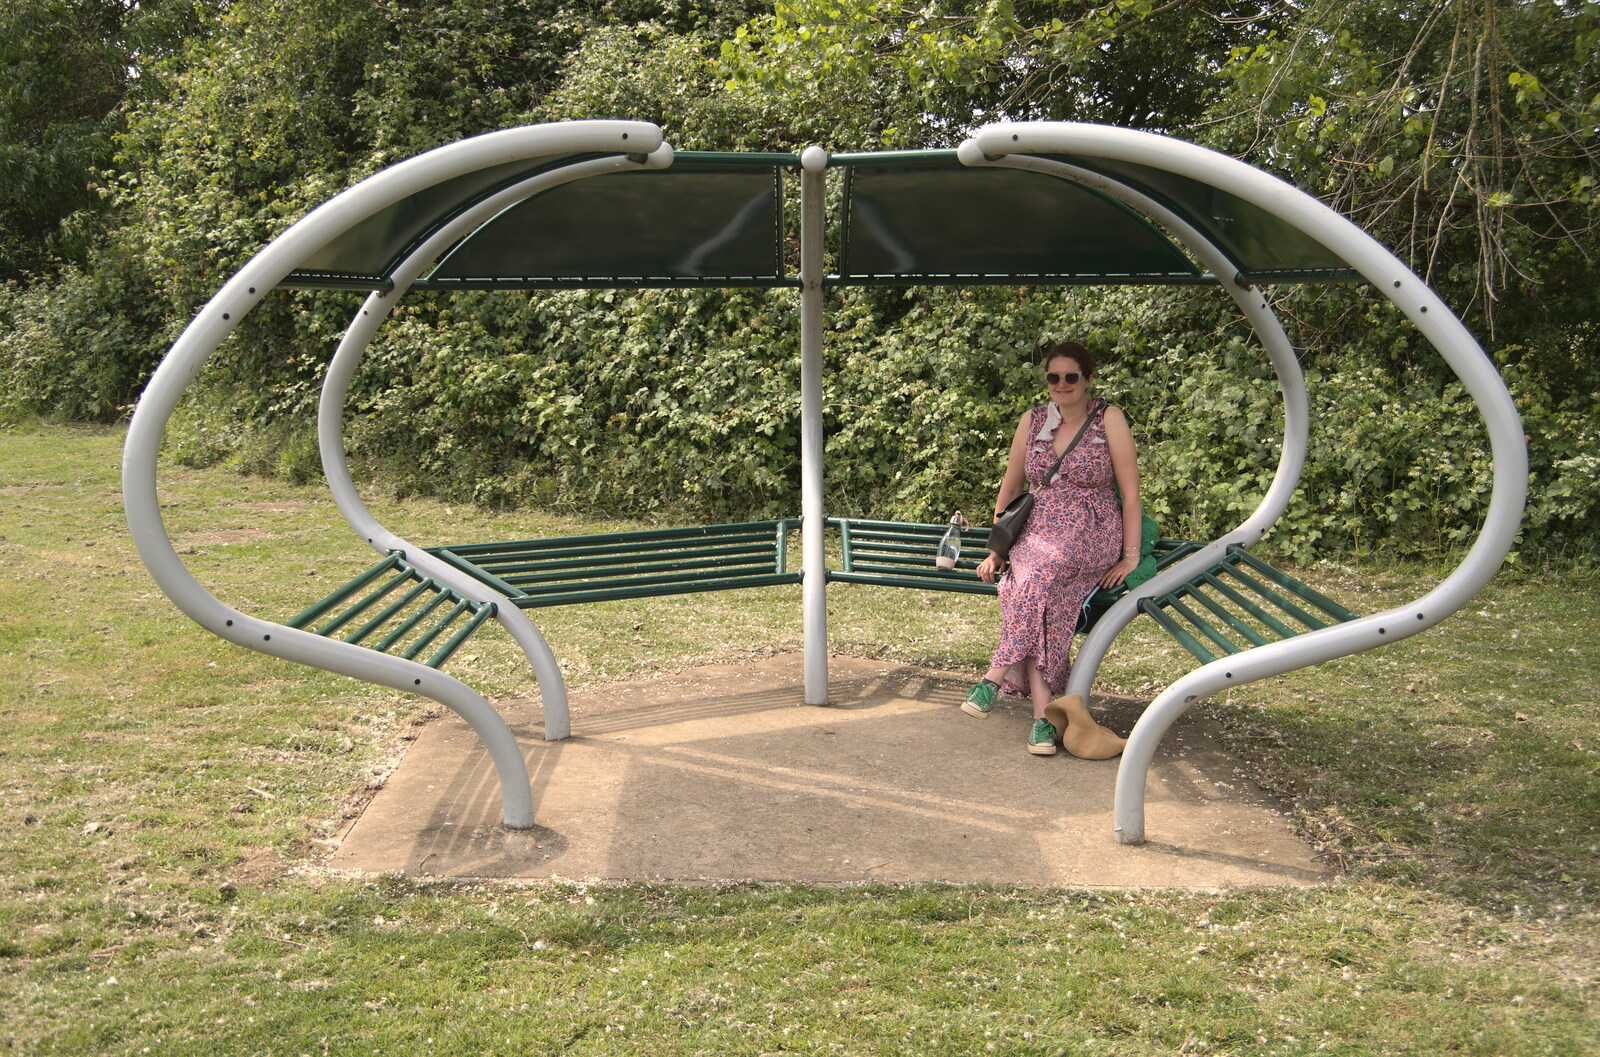 Isobel sits in a shelter on the playing field from The Gislingham Silver Band at Barningham, Suffolk - 3rd June 2022